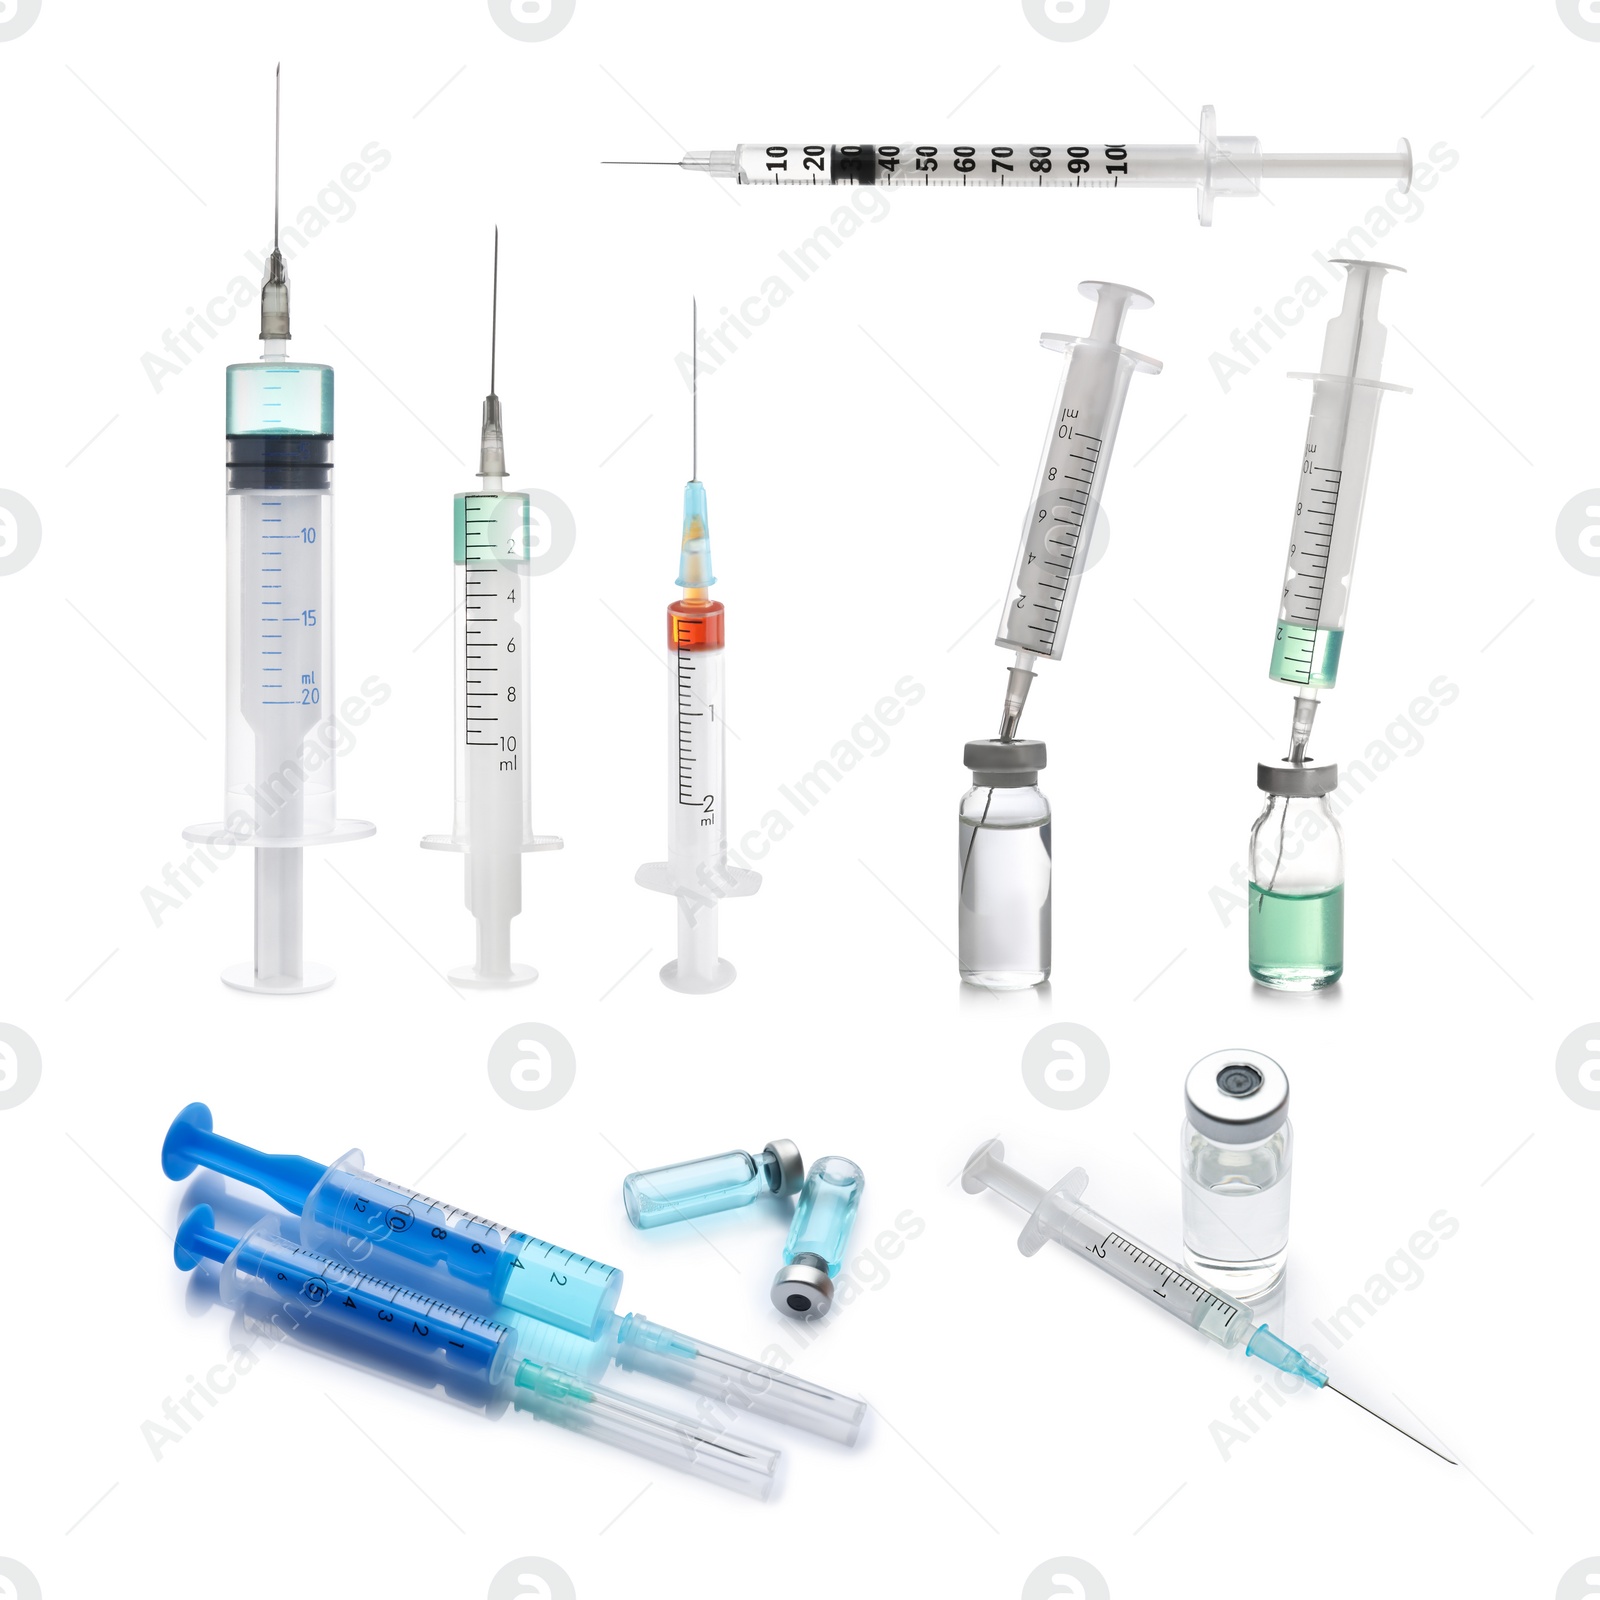 Image of Disposable syringes with needles and vials on white background, collage